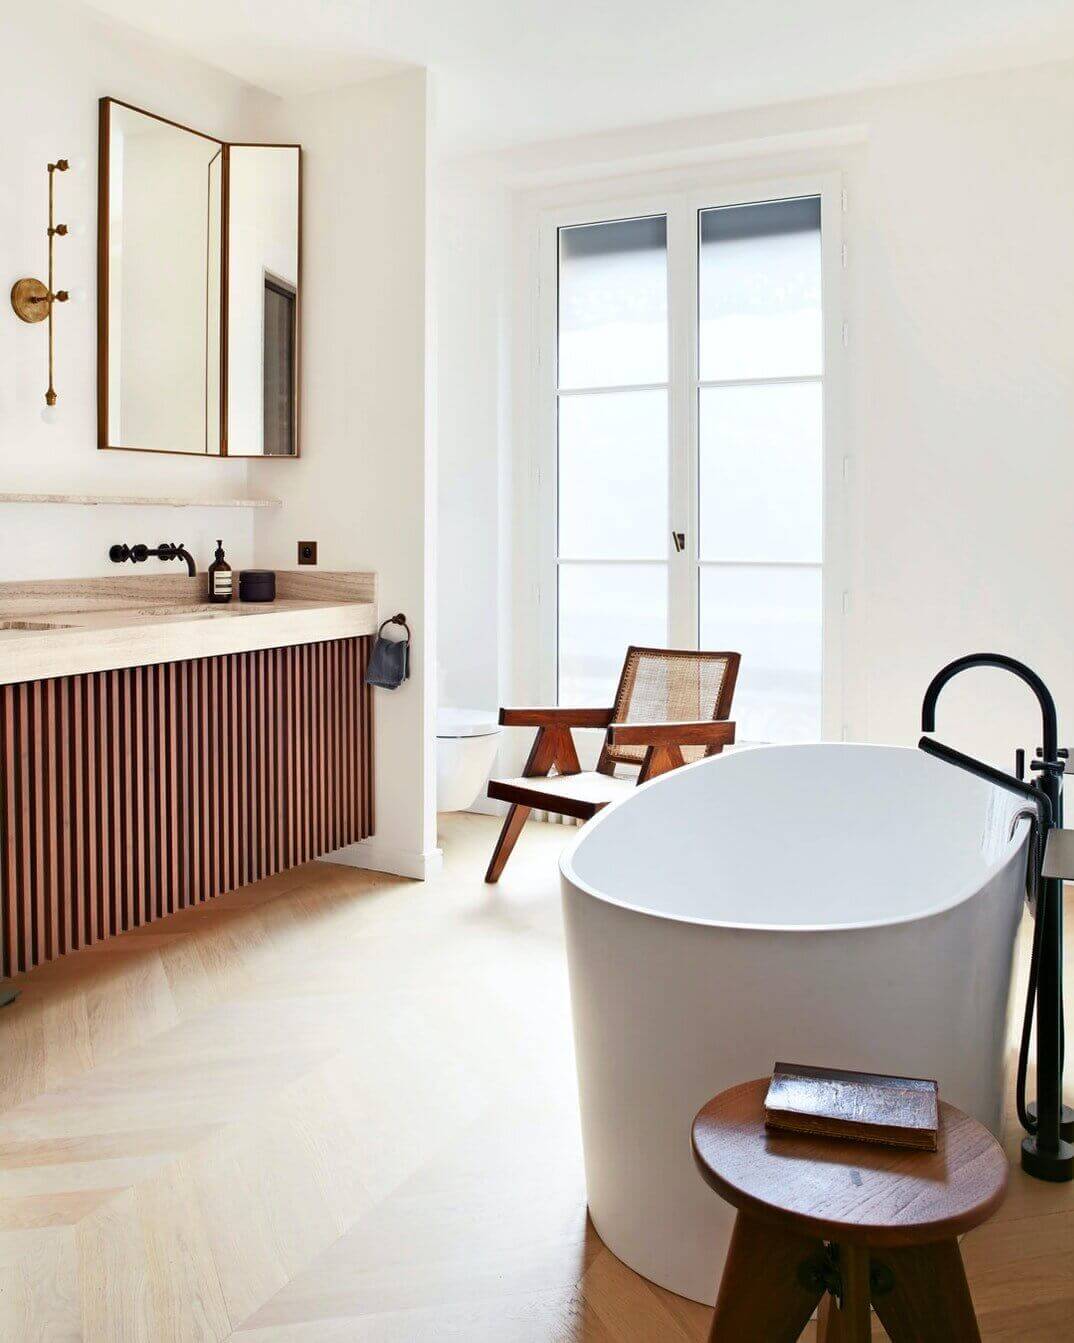 19th paris apartment modern classic design ribbed wood bathroom nordroom Get The Parisian Apartment Style in Your Home